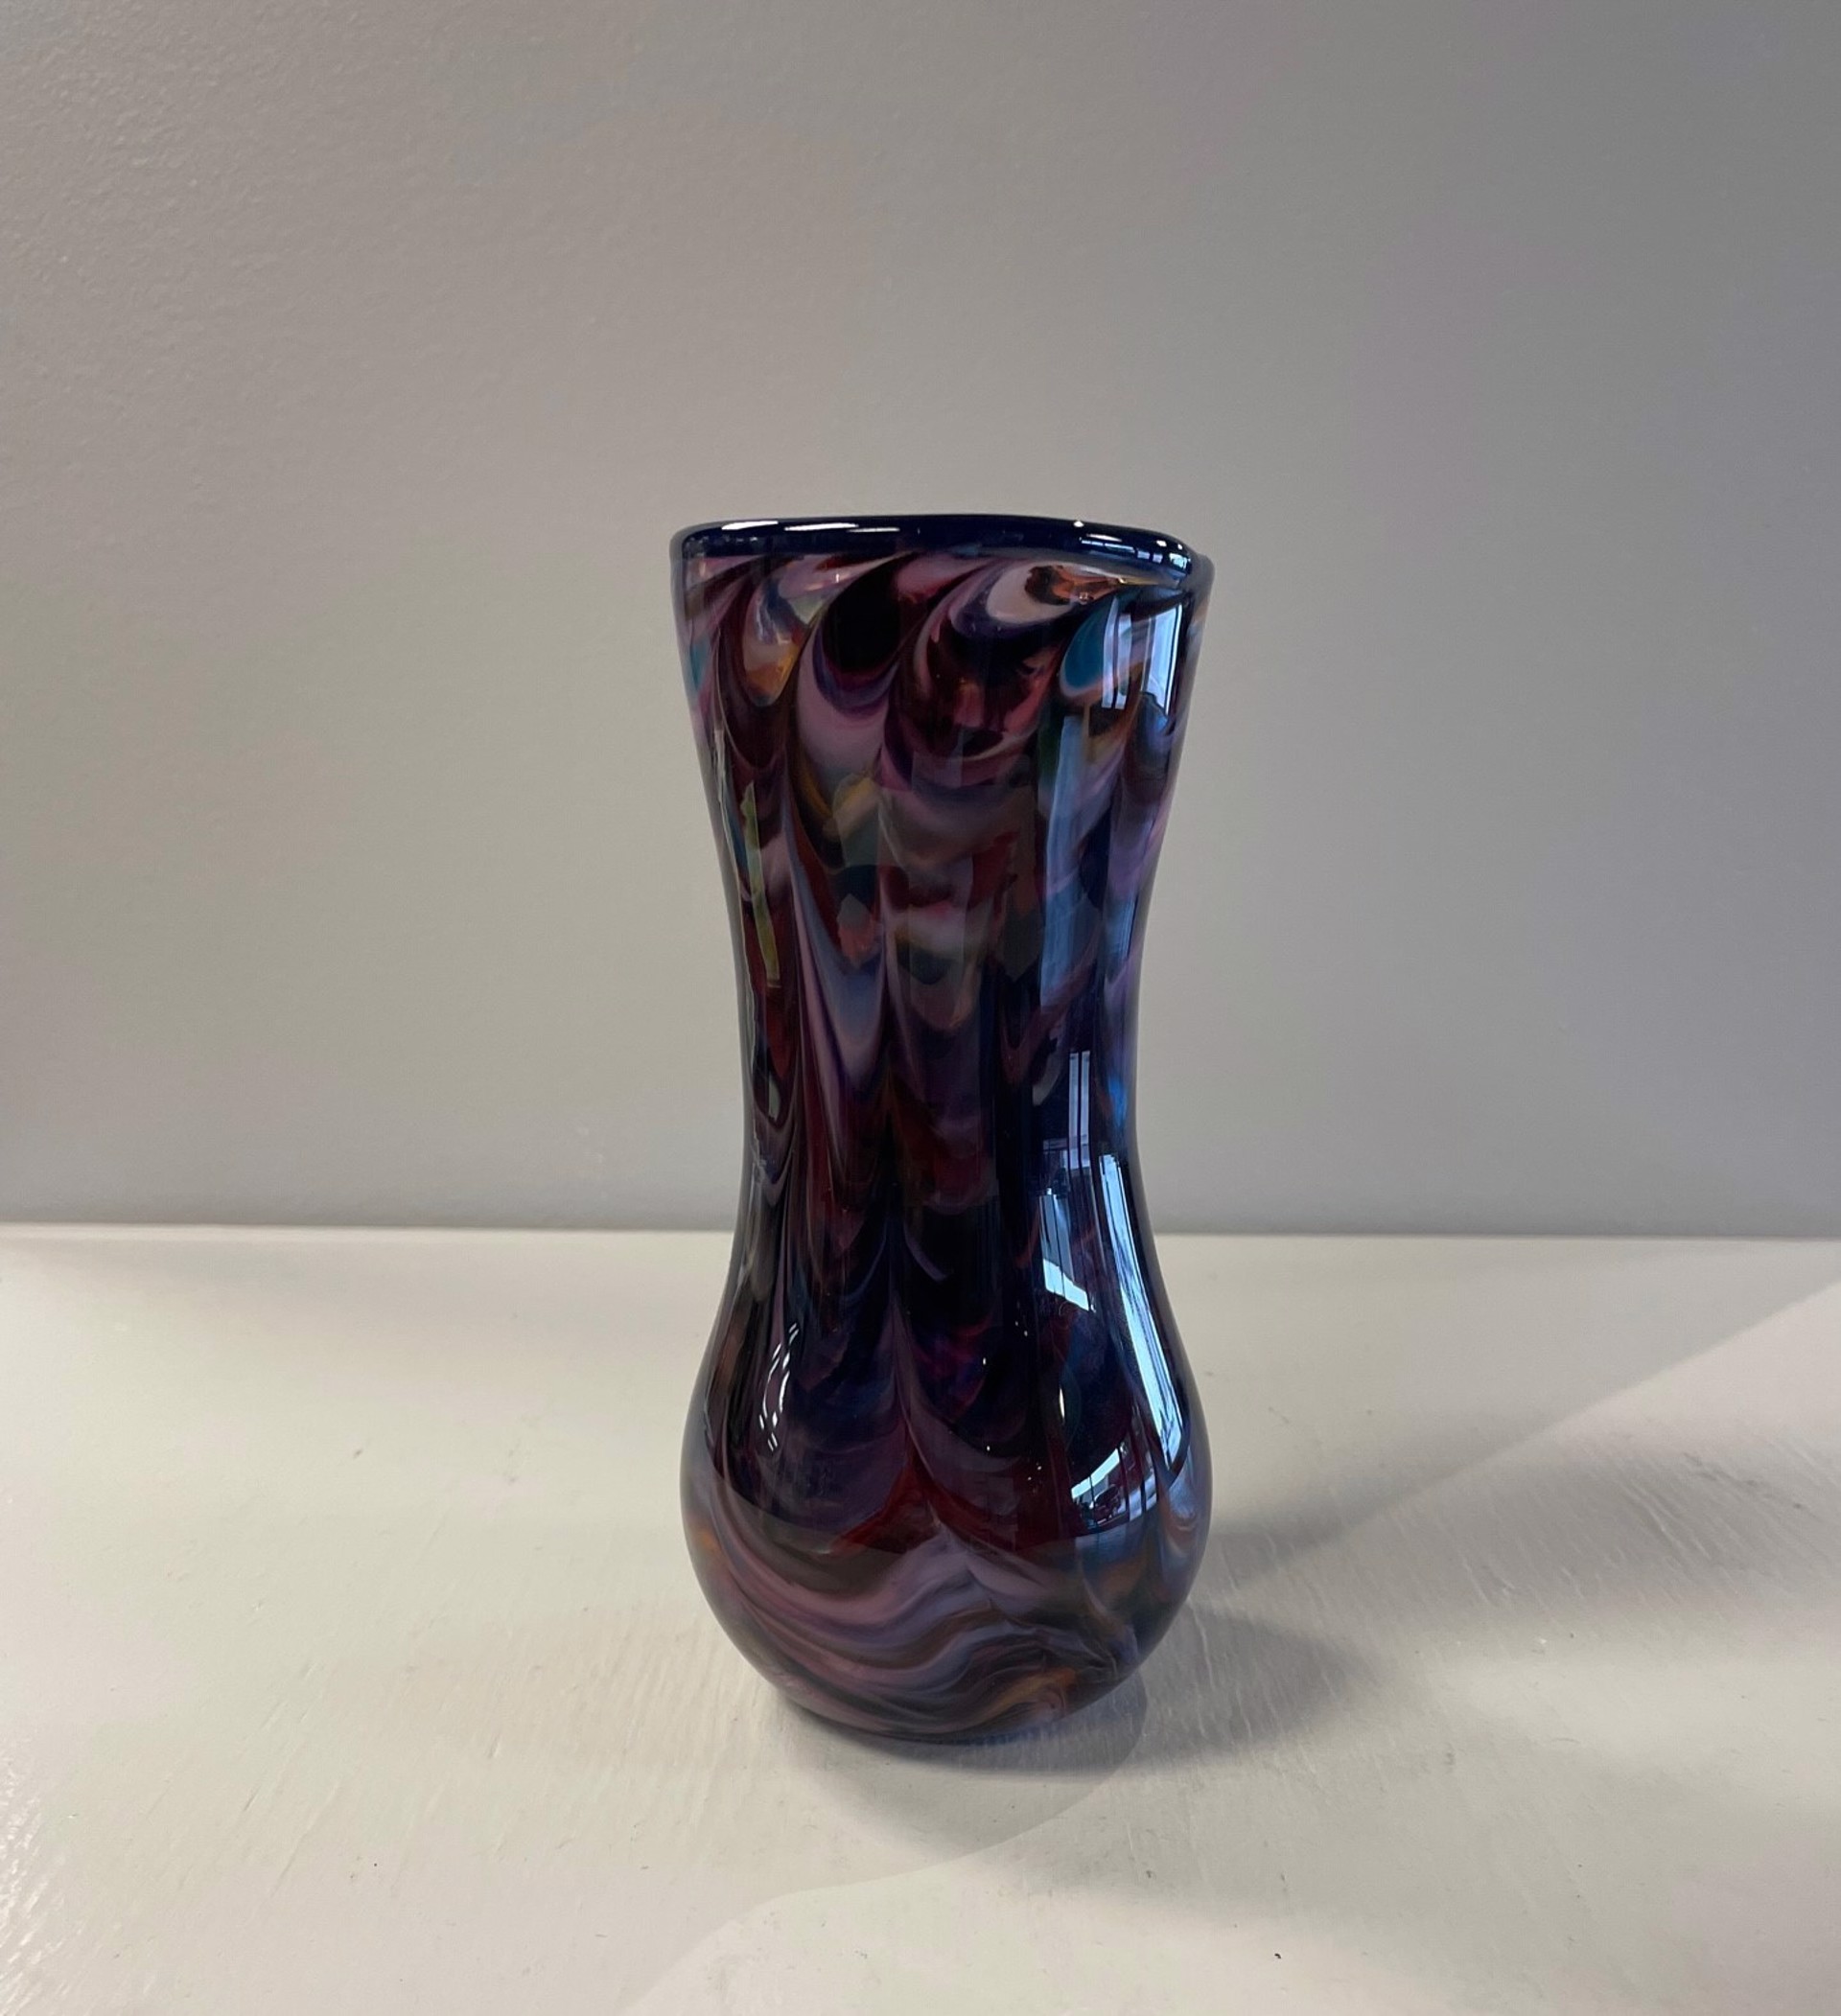 Painted Lady by AlBo Glass